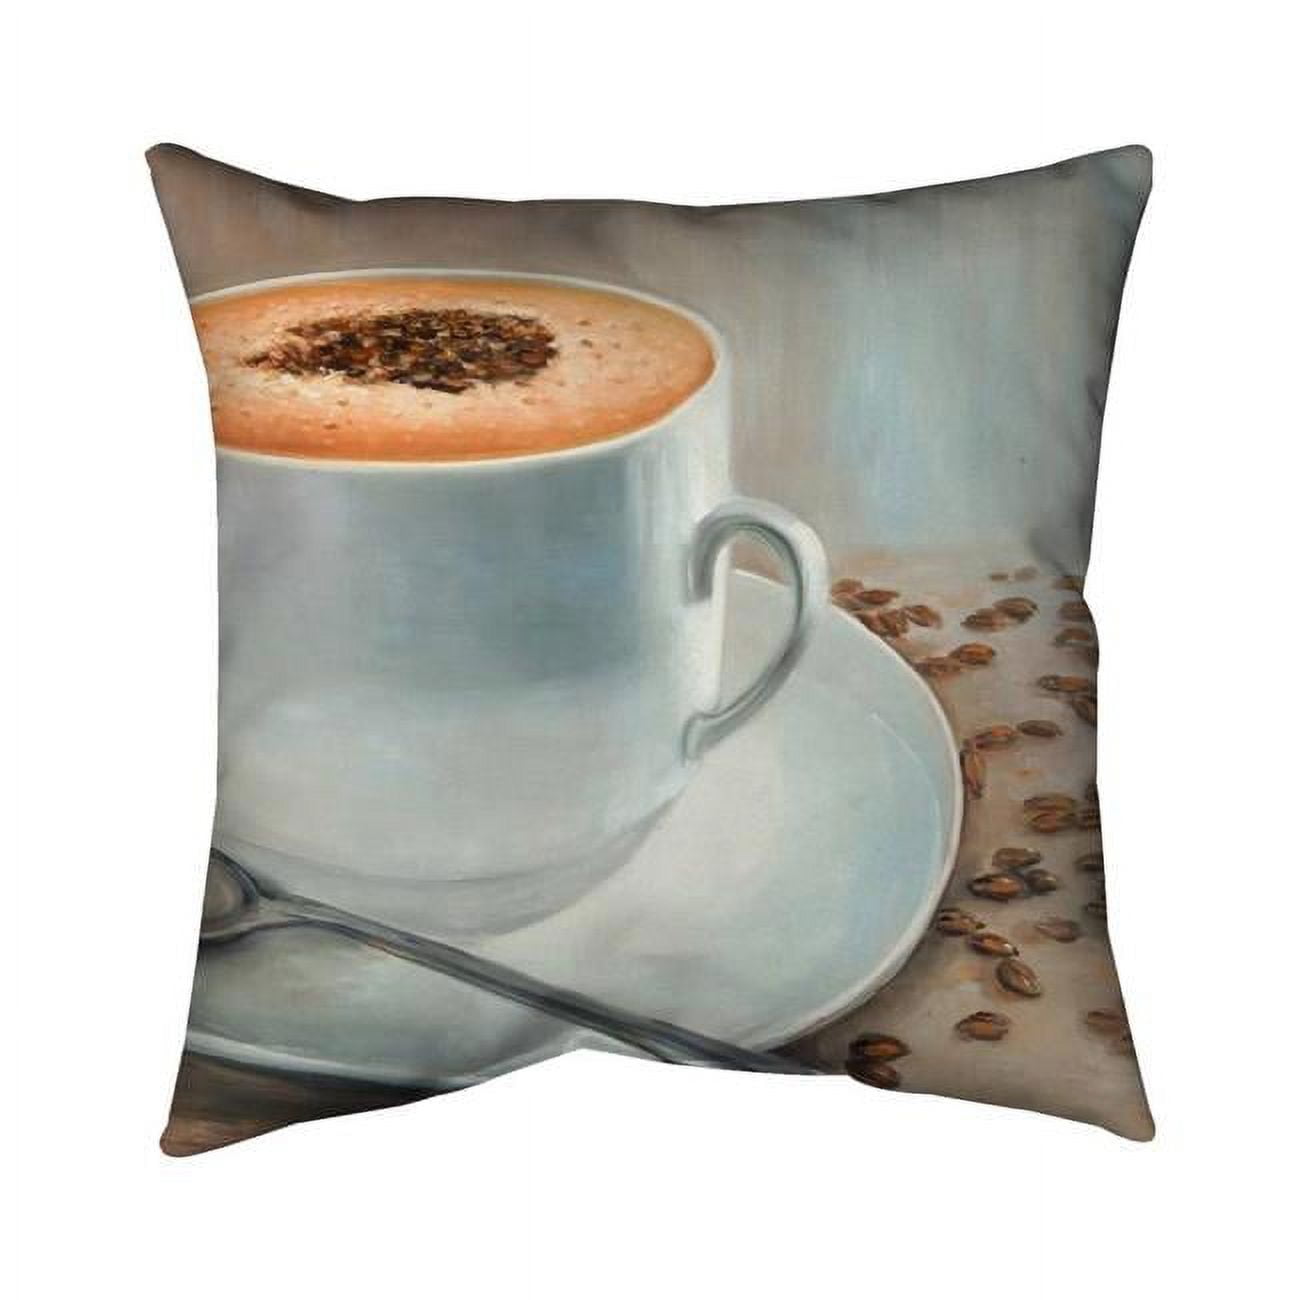 Begin Home Decor 5541-2020-GA66 20 x 20 in. Cappuccino Time-Double Sided Print Indoor Pillow